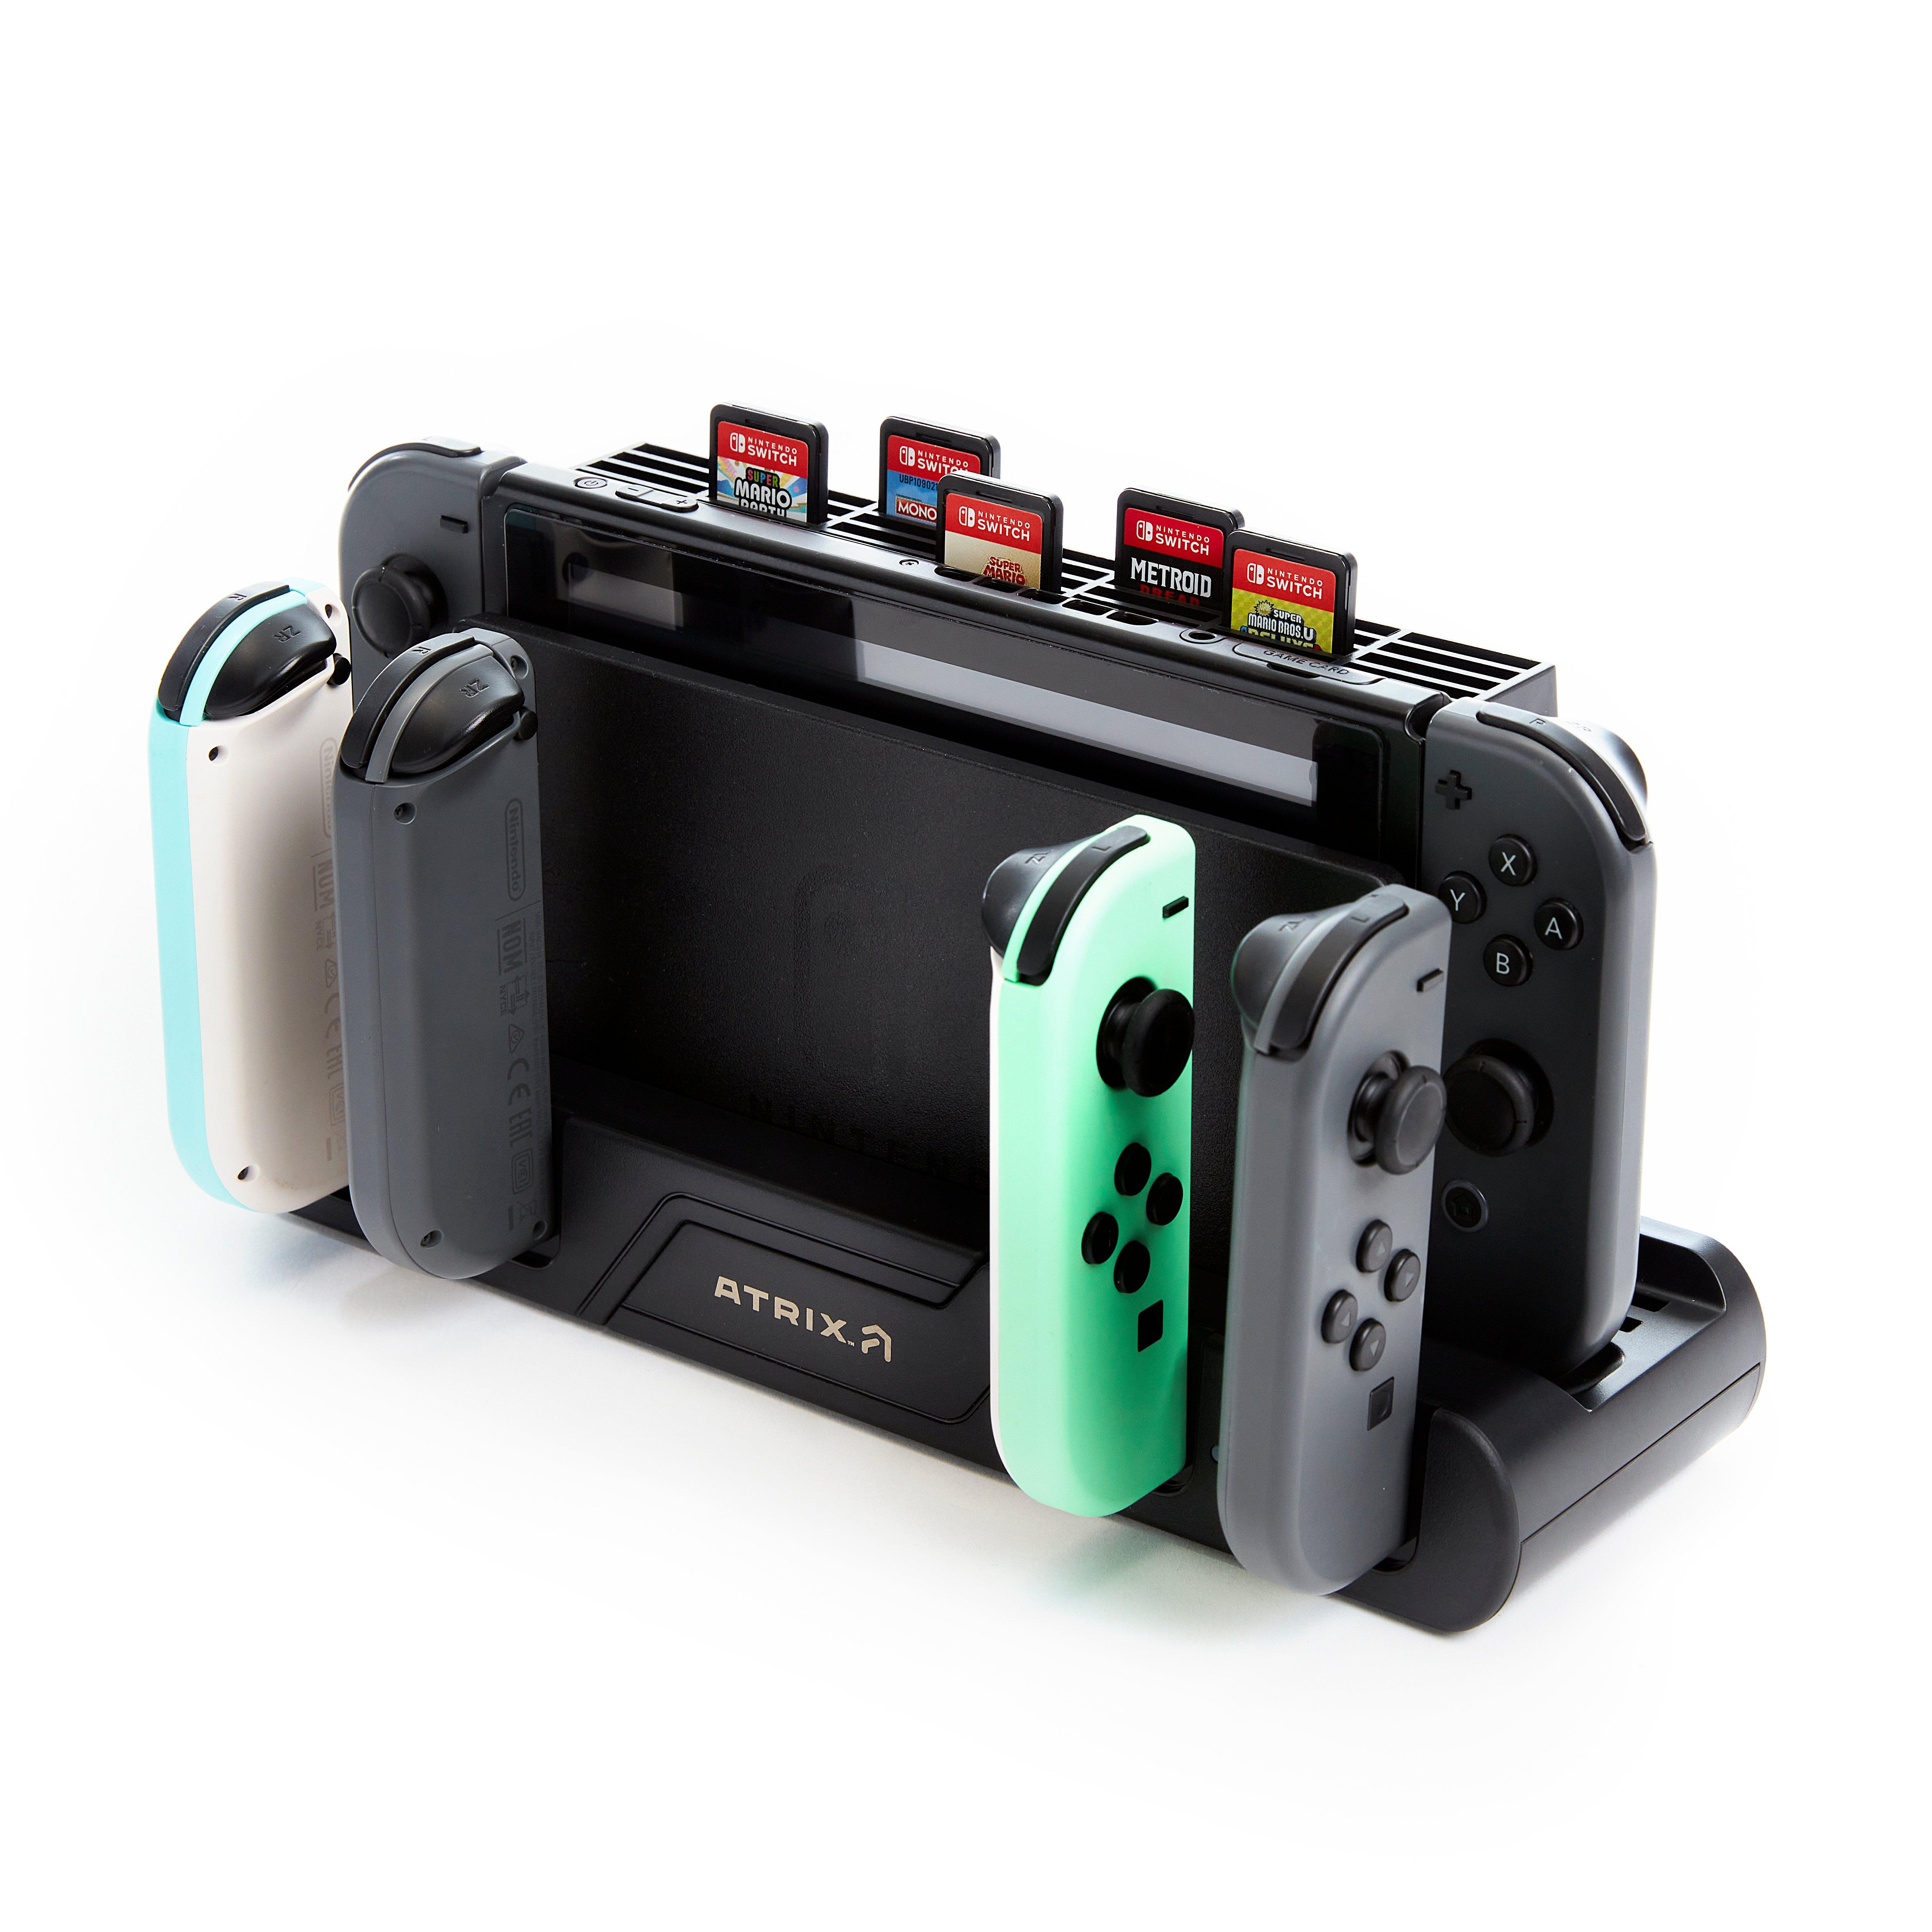 Atrix Nintendo Switch 6-in-1 Charging Dock and Game Deck